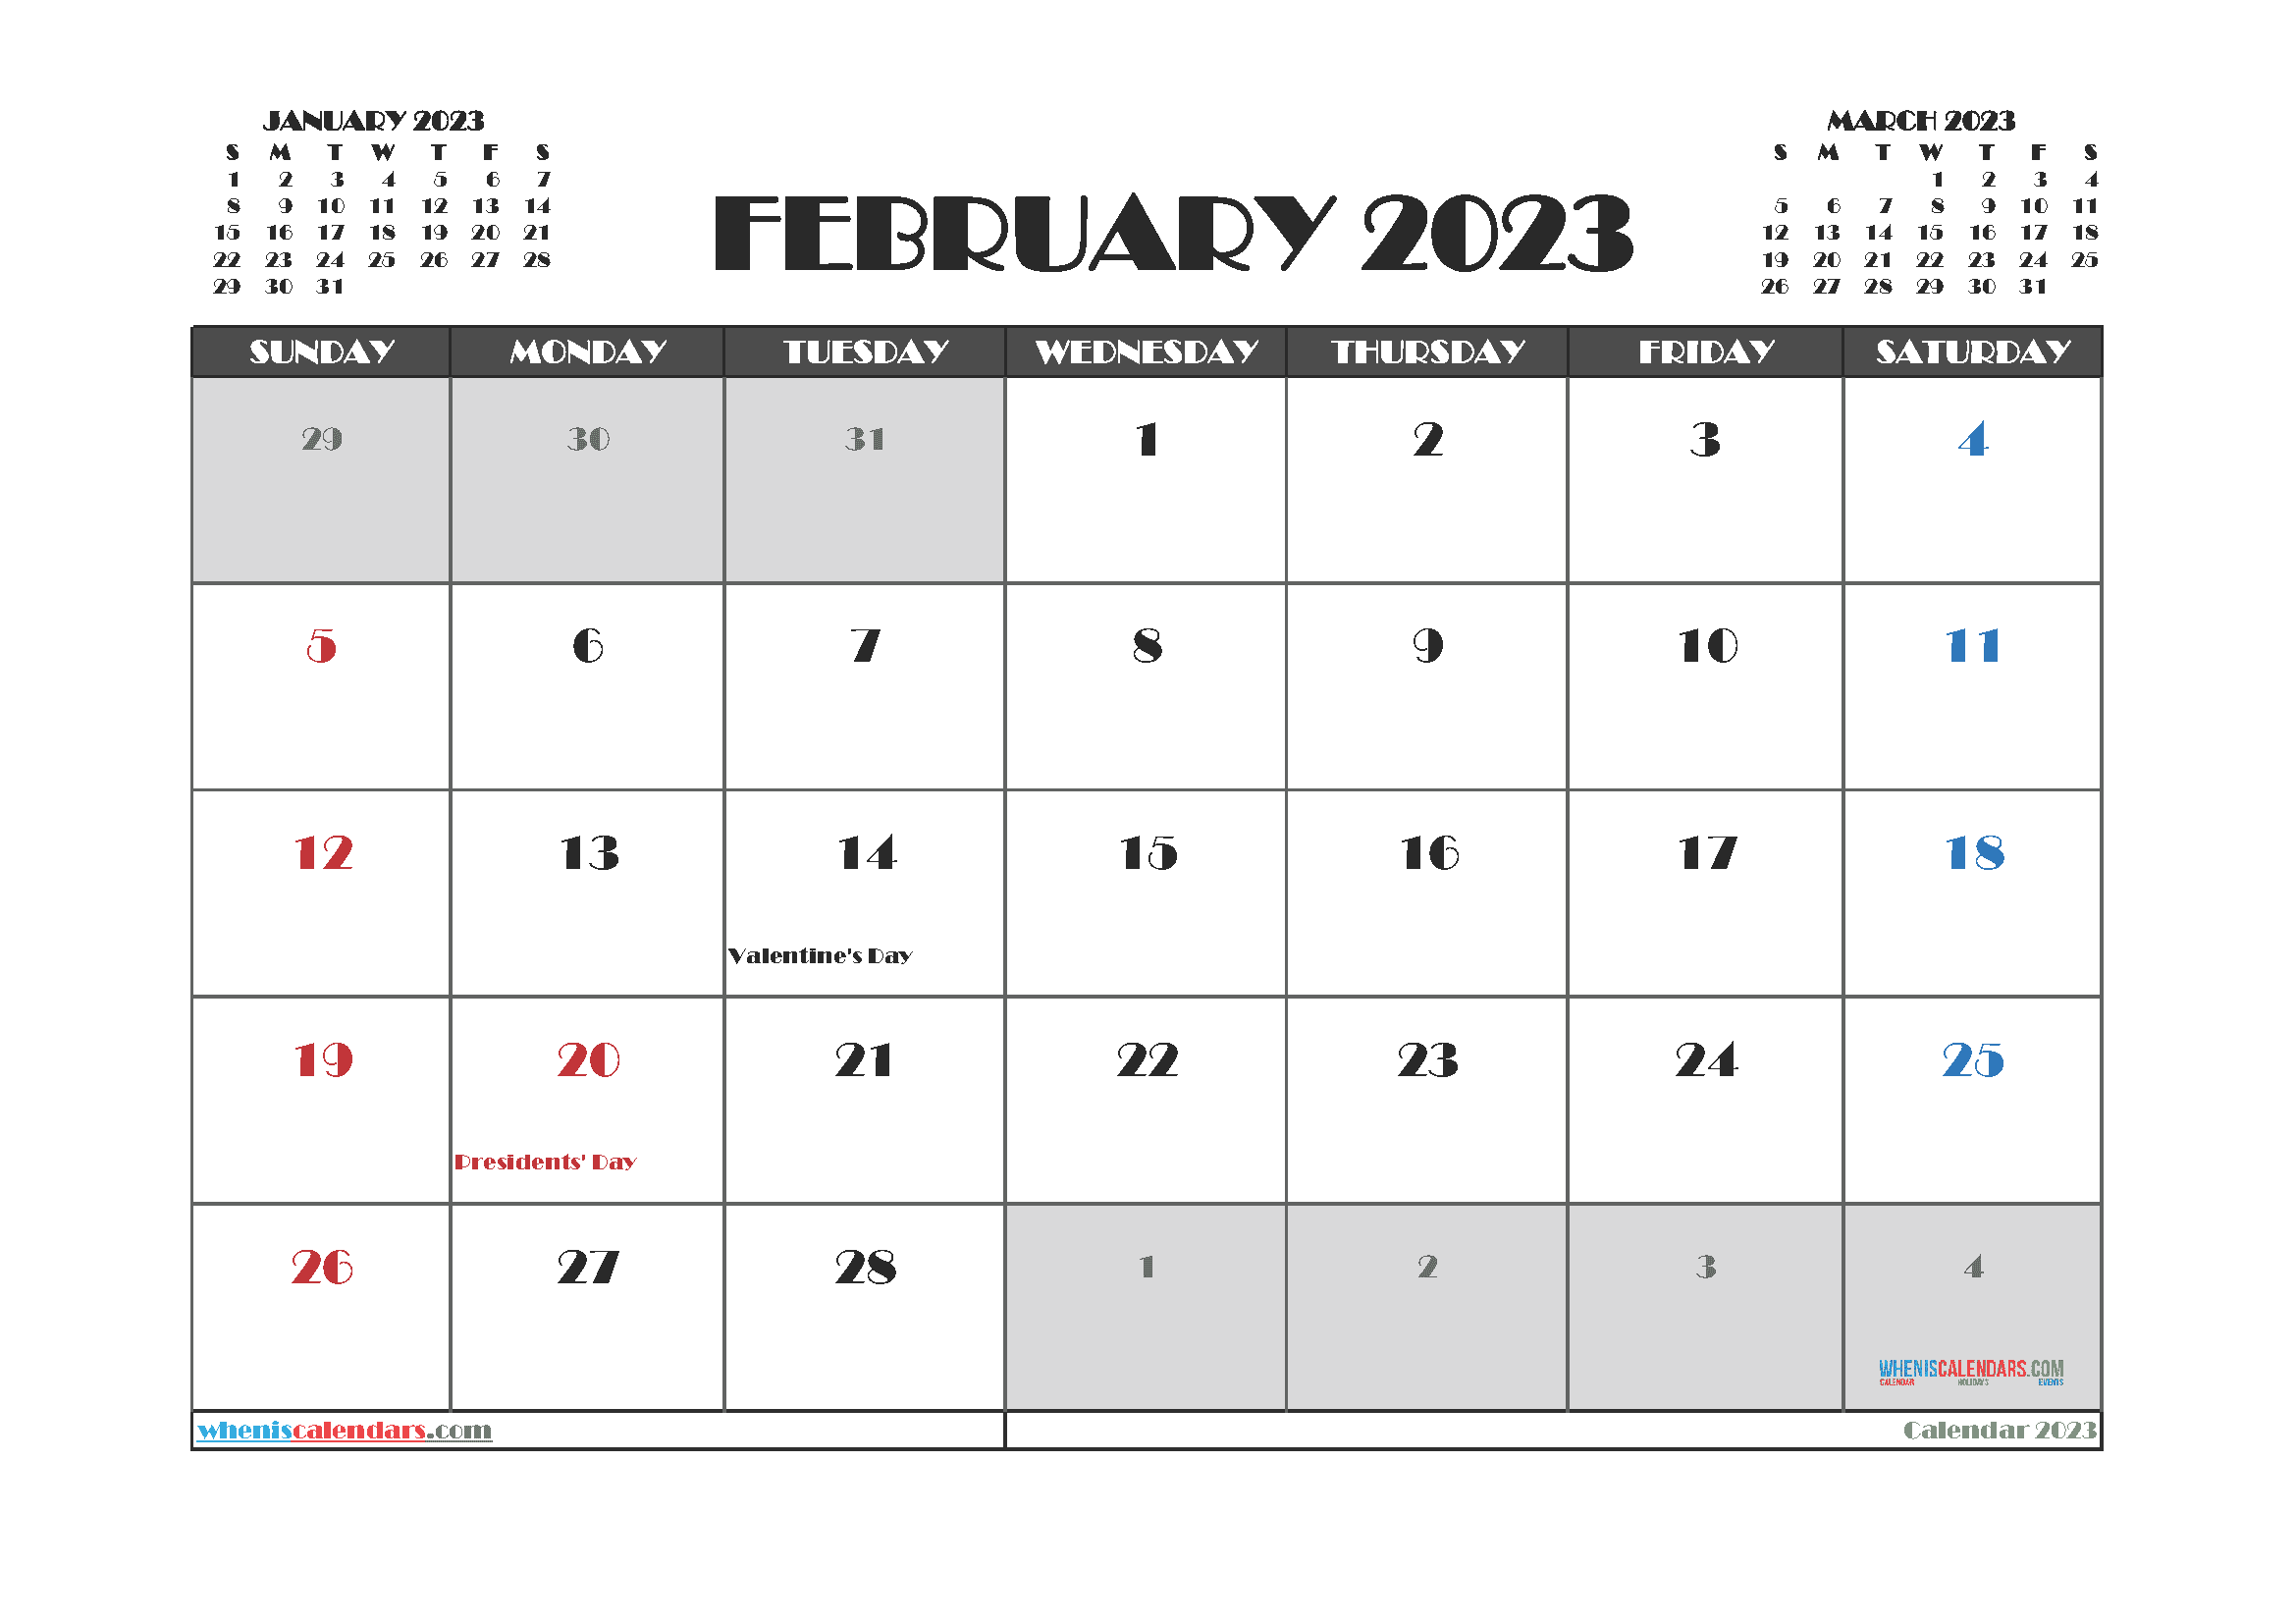 Free Printable Calendar 2023 February with Holidays PDF in Landscape